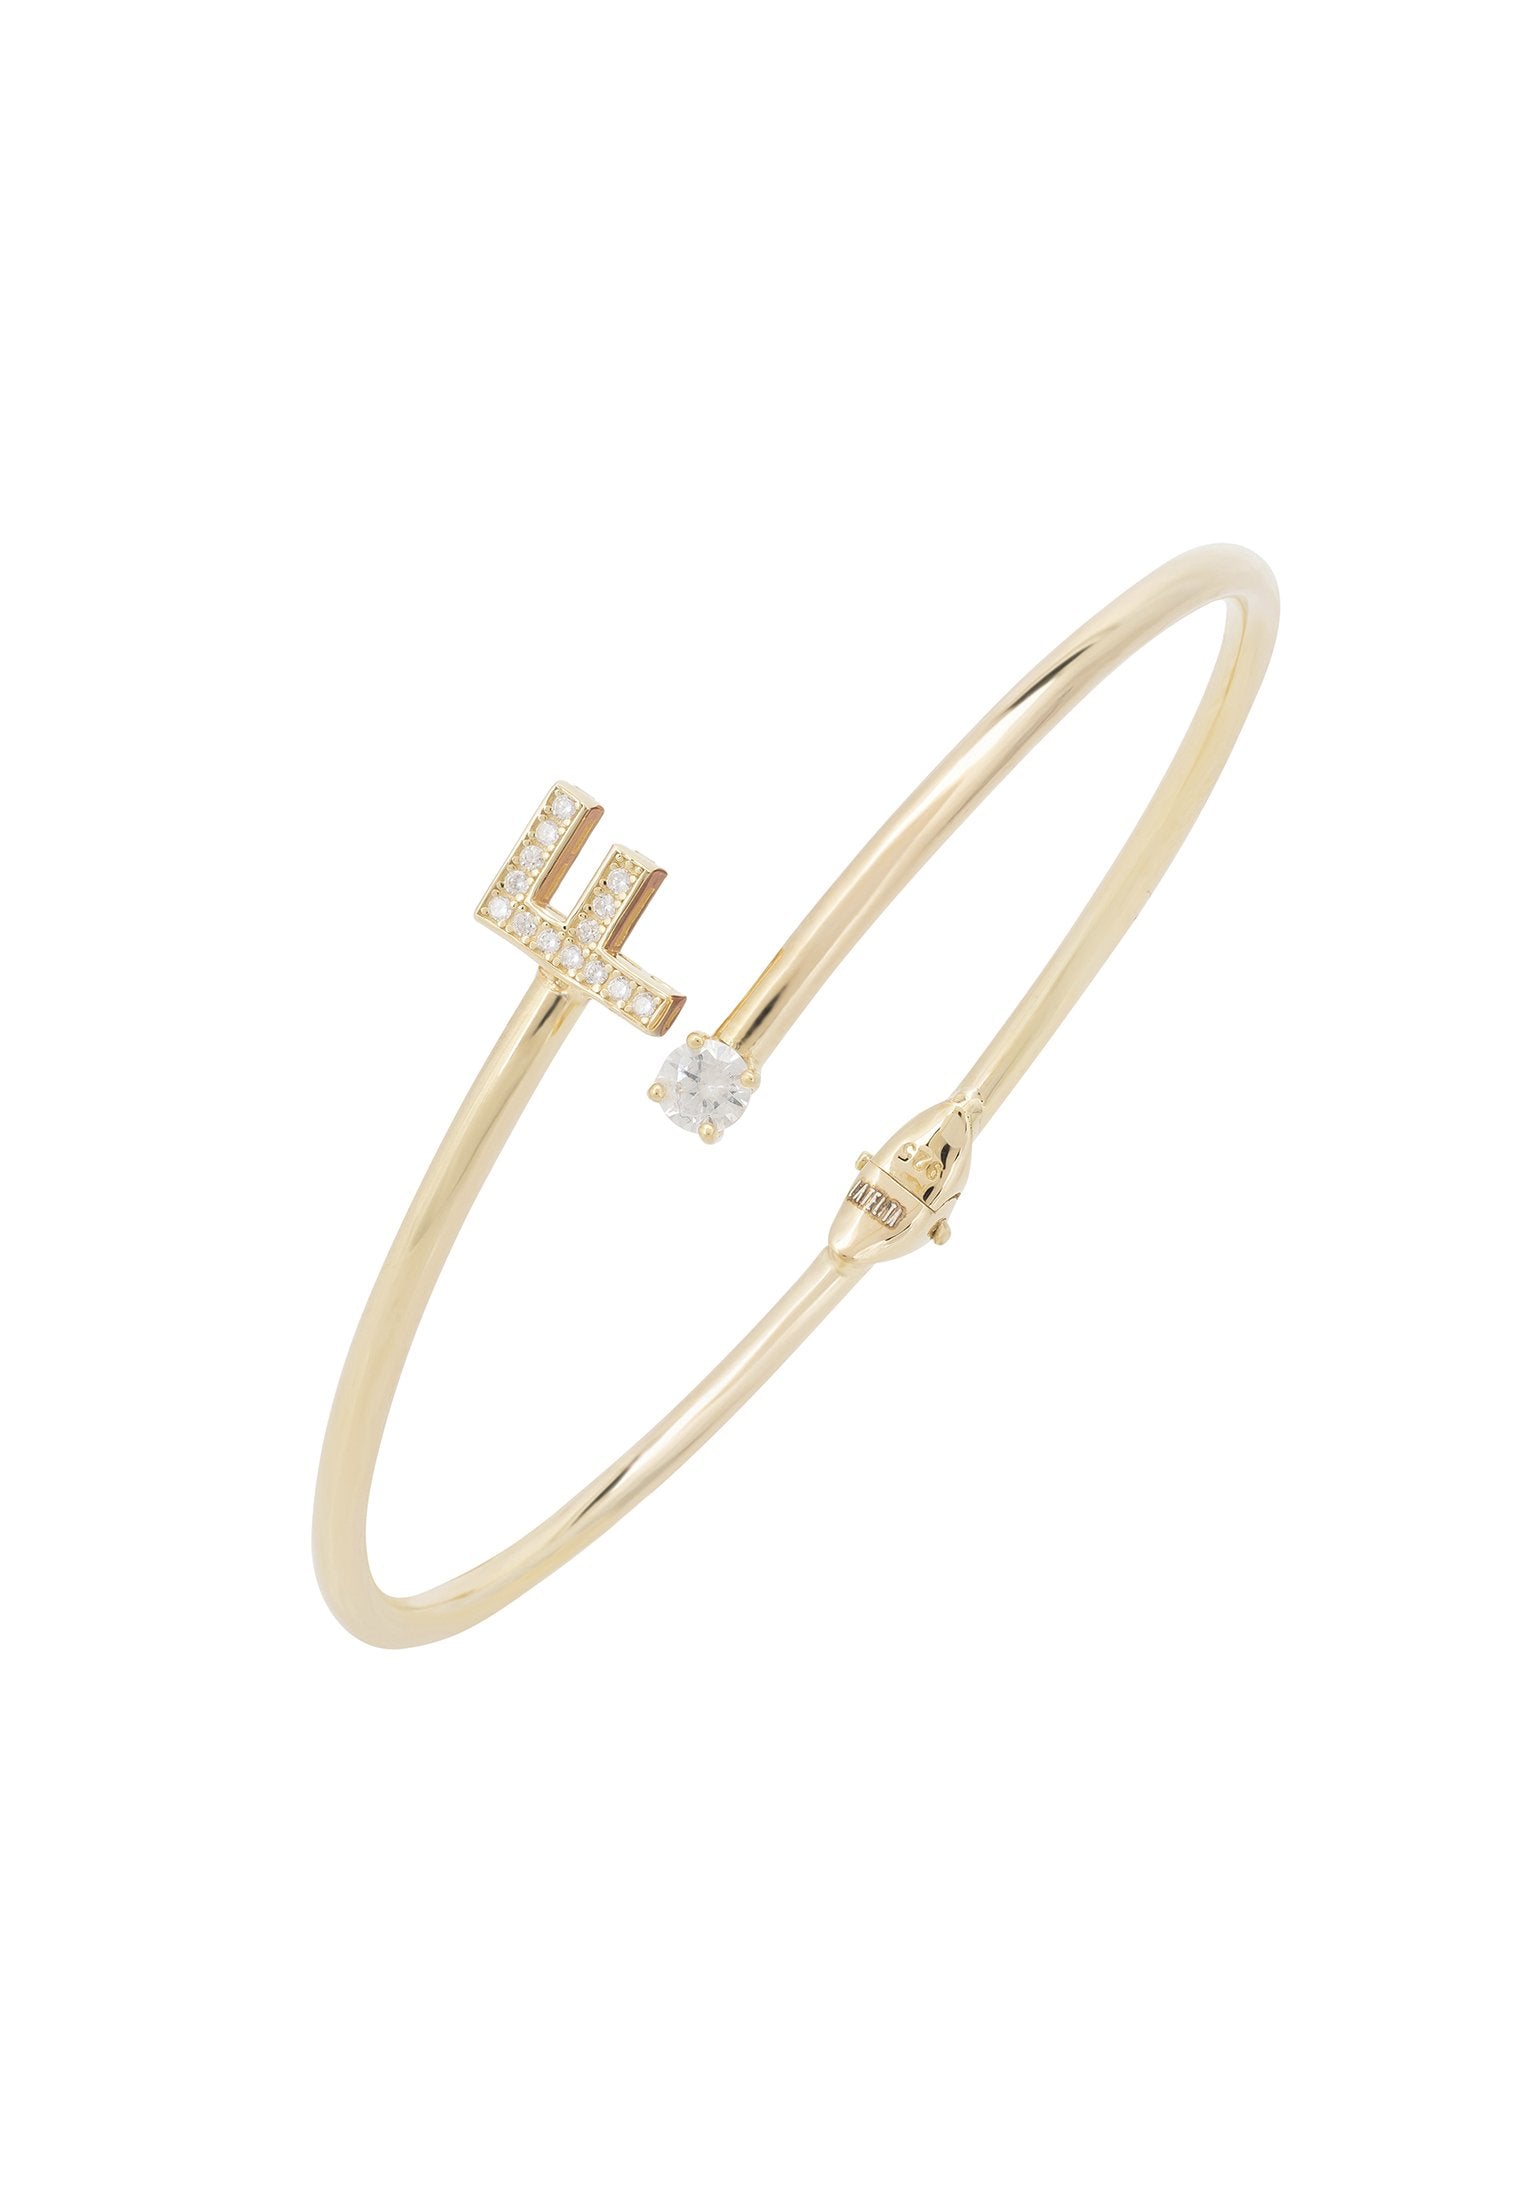 Gold Initial Bangle Bracelet with Zircon Monogram and Cubic Zirconia Accent - Personalized Birthday Gift Idea Bijou Her